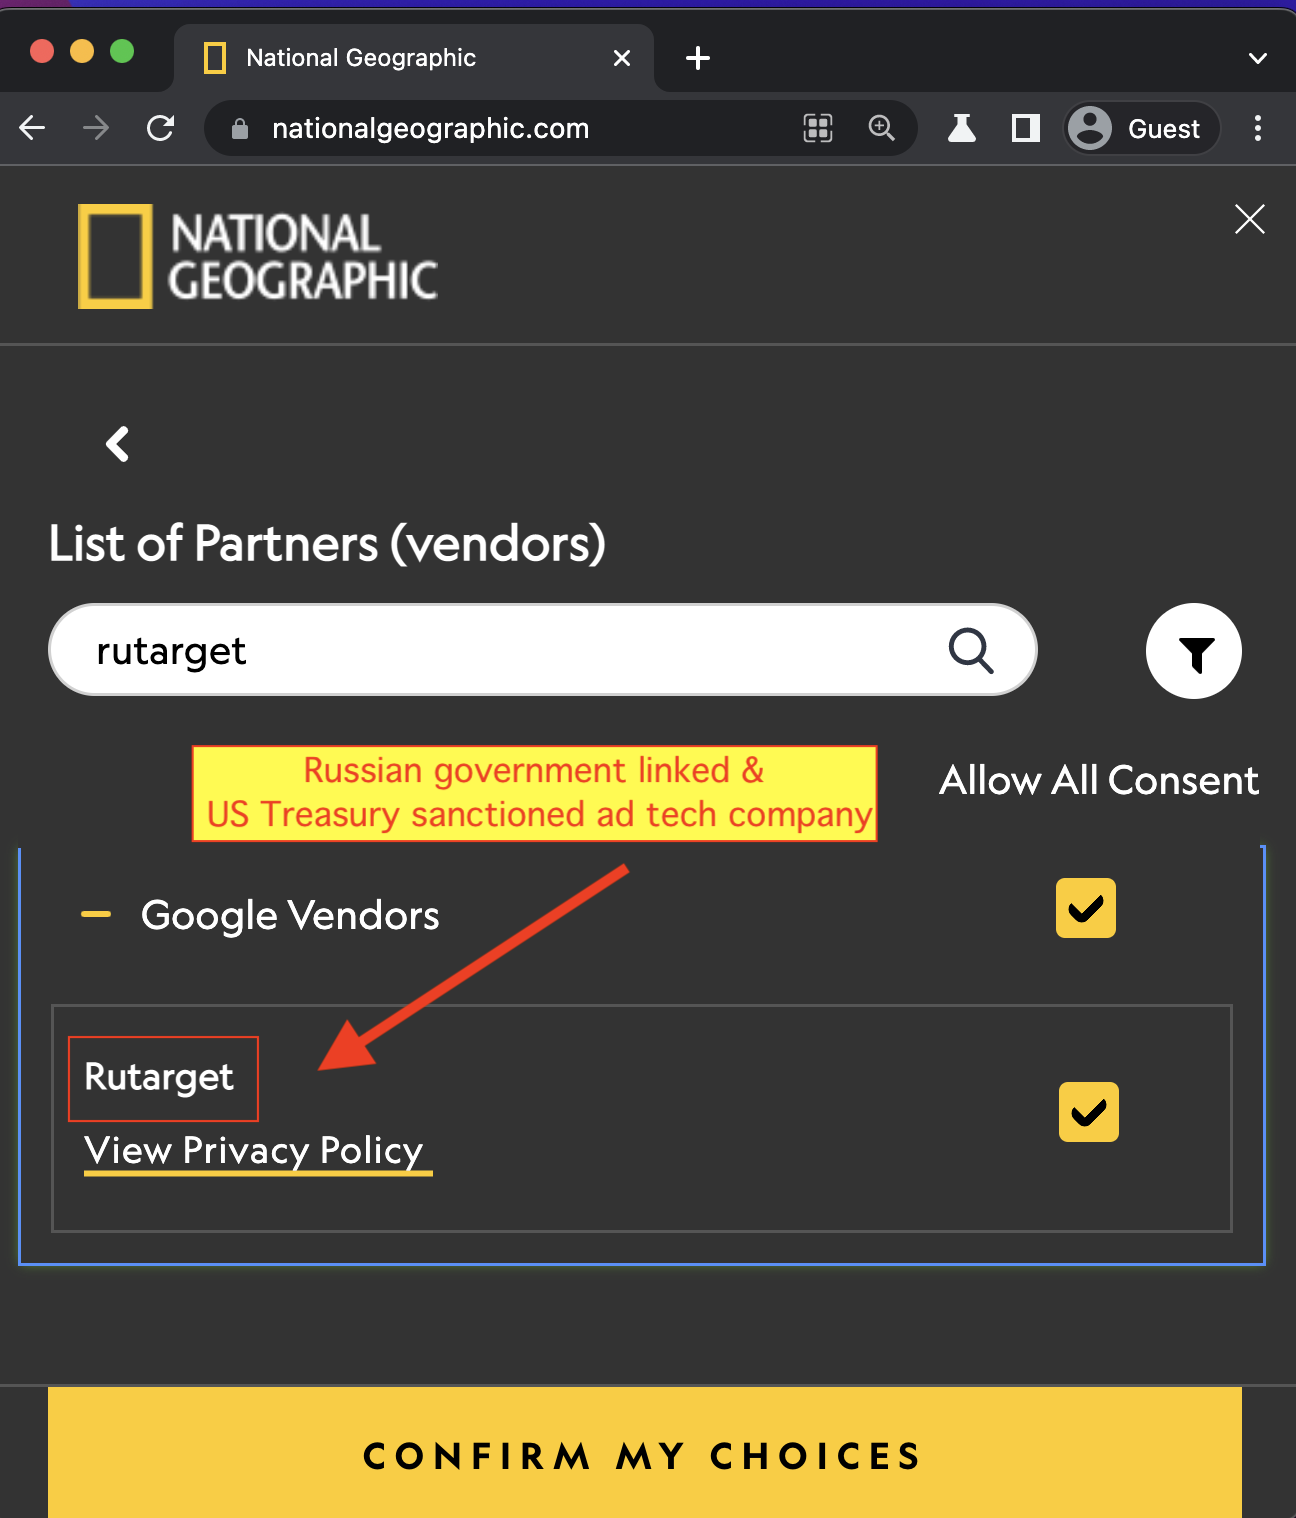 national-geographic-rutarget-vendor-consents.png